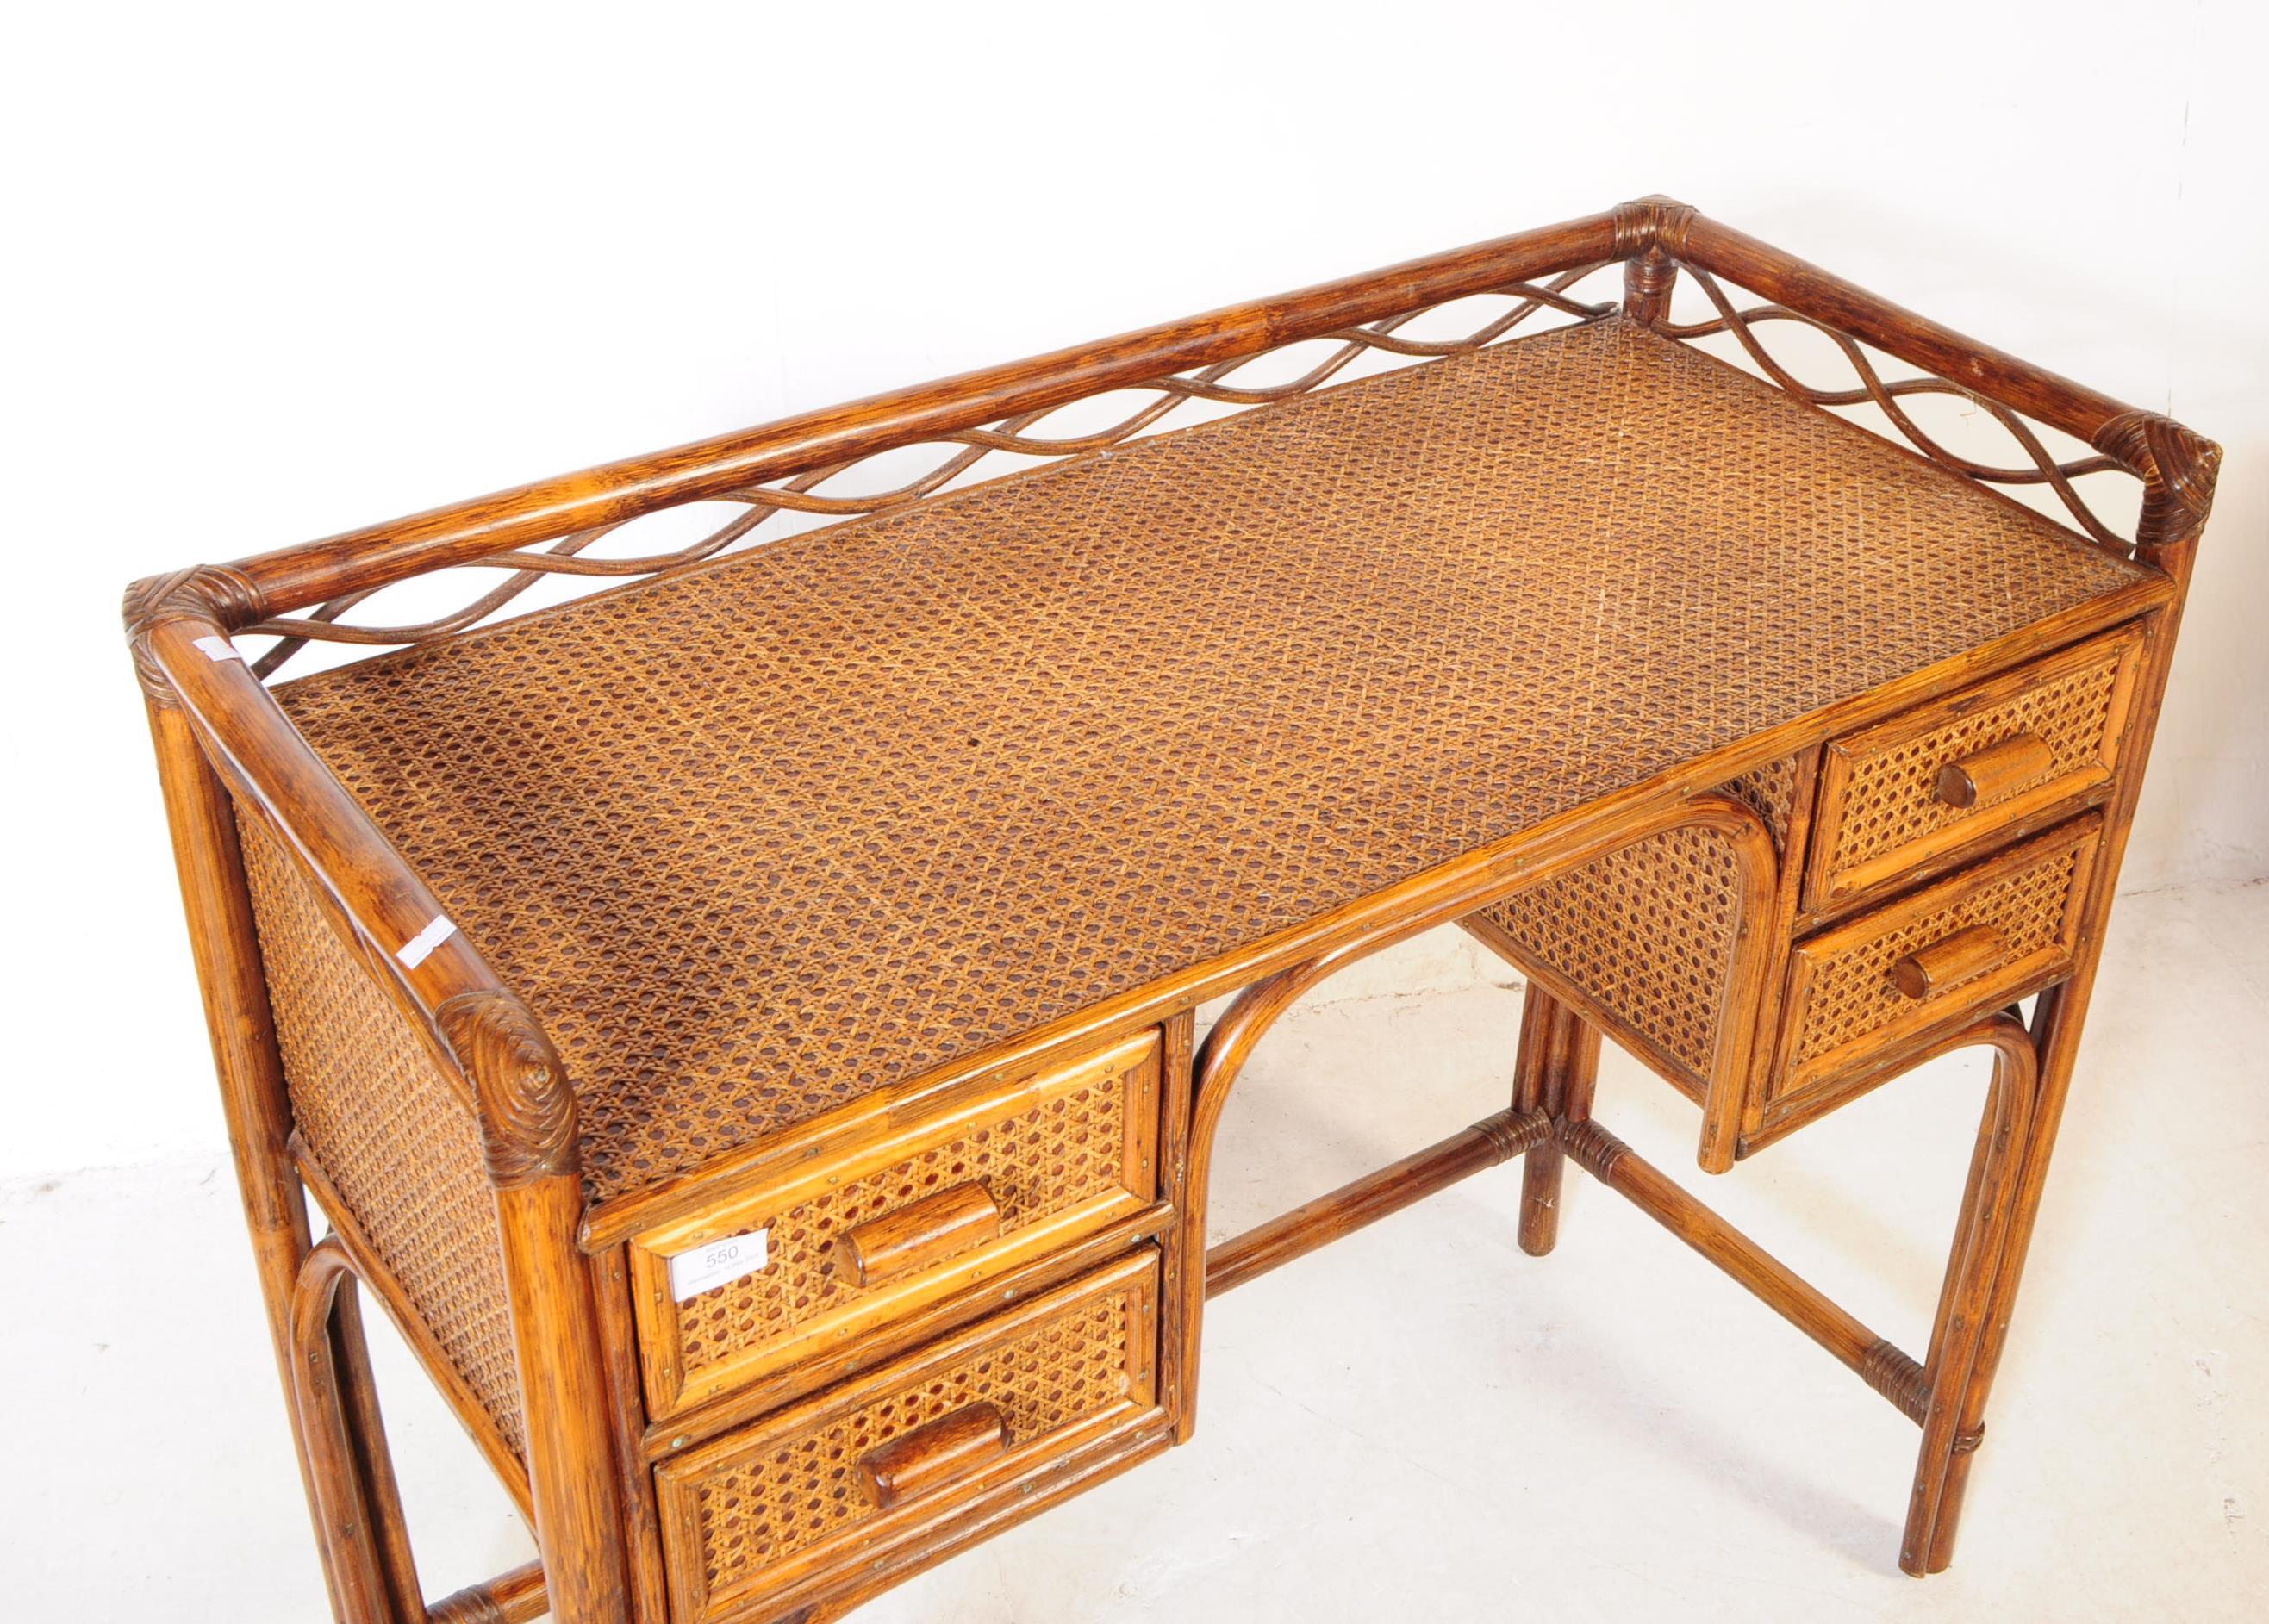 ANGRAVES OF LEICESTER - RETRO MID 20TH CENTURY RATTAN DESK - Image 2 of 6